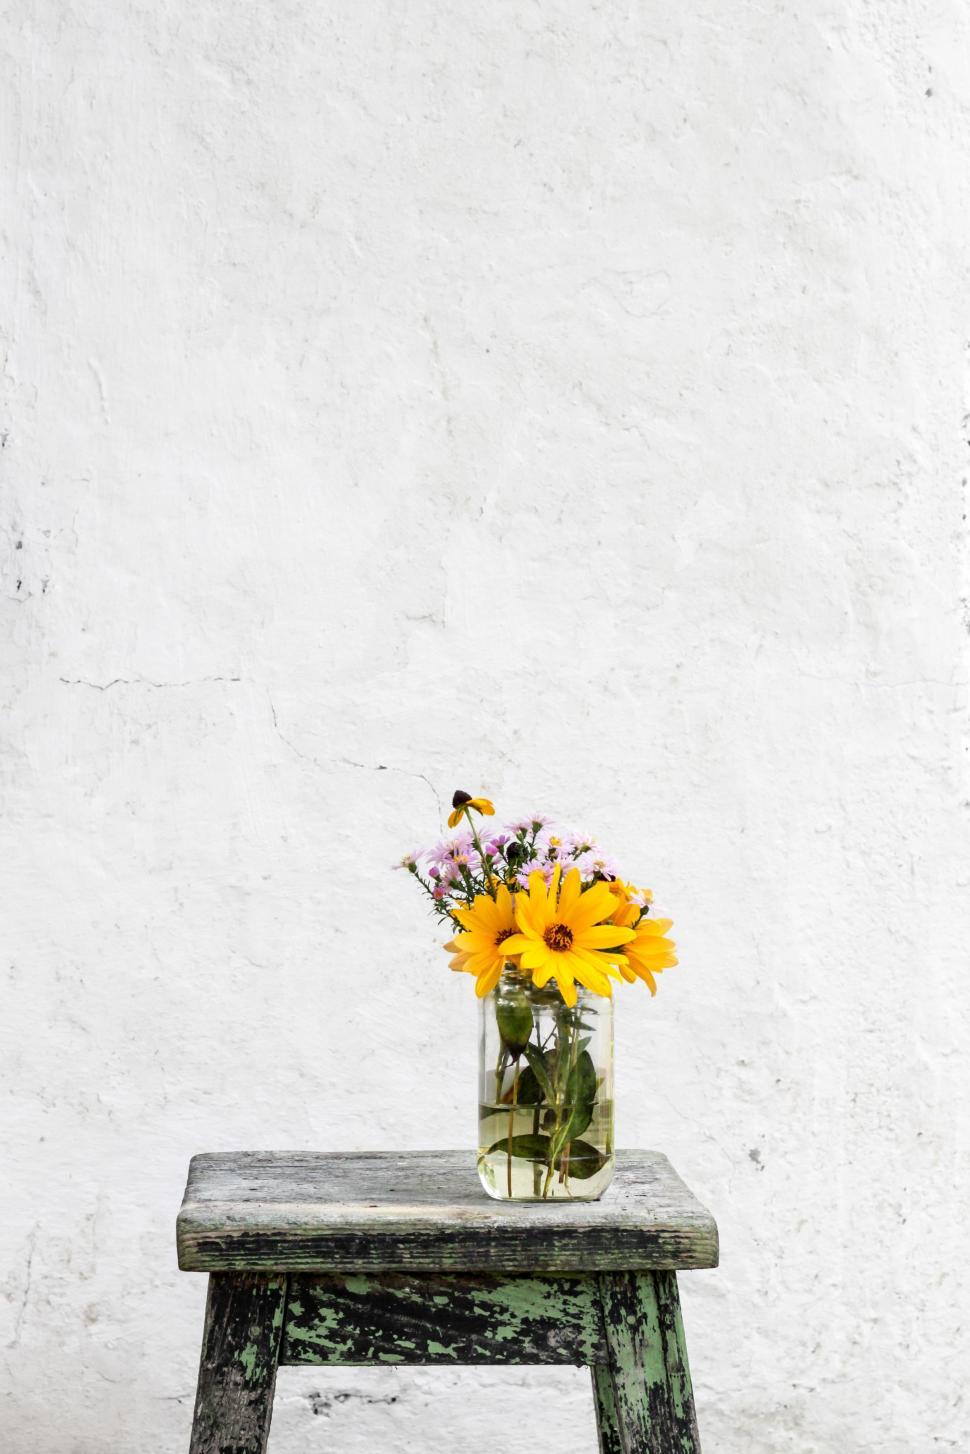 Free Image of Wooden Bench With Vase of Flowers 